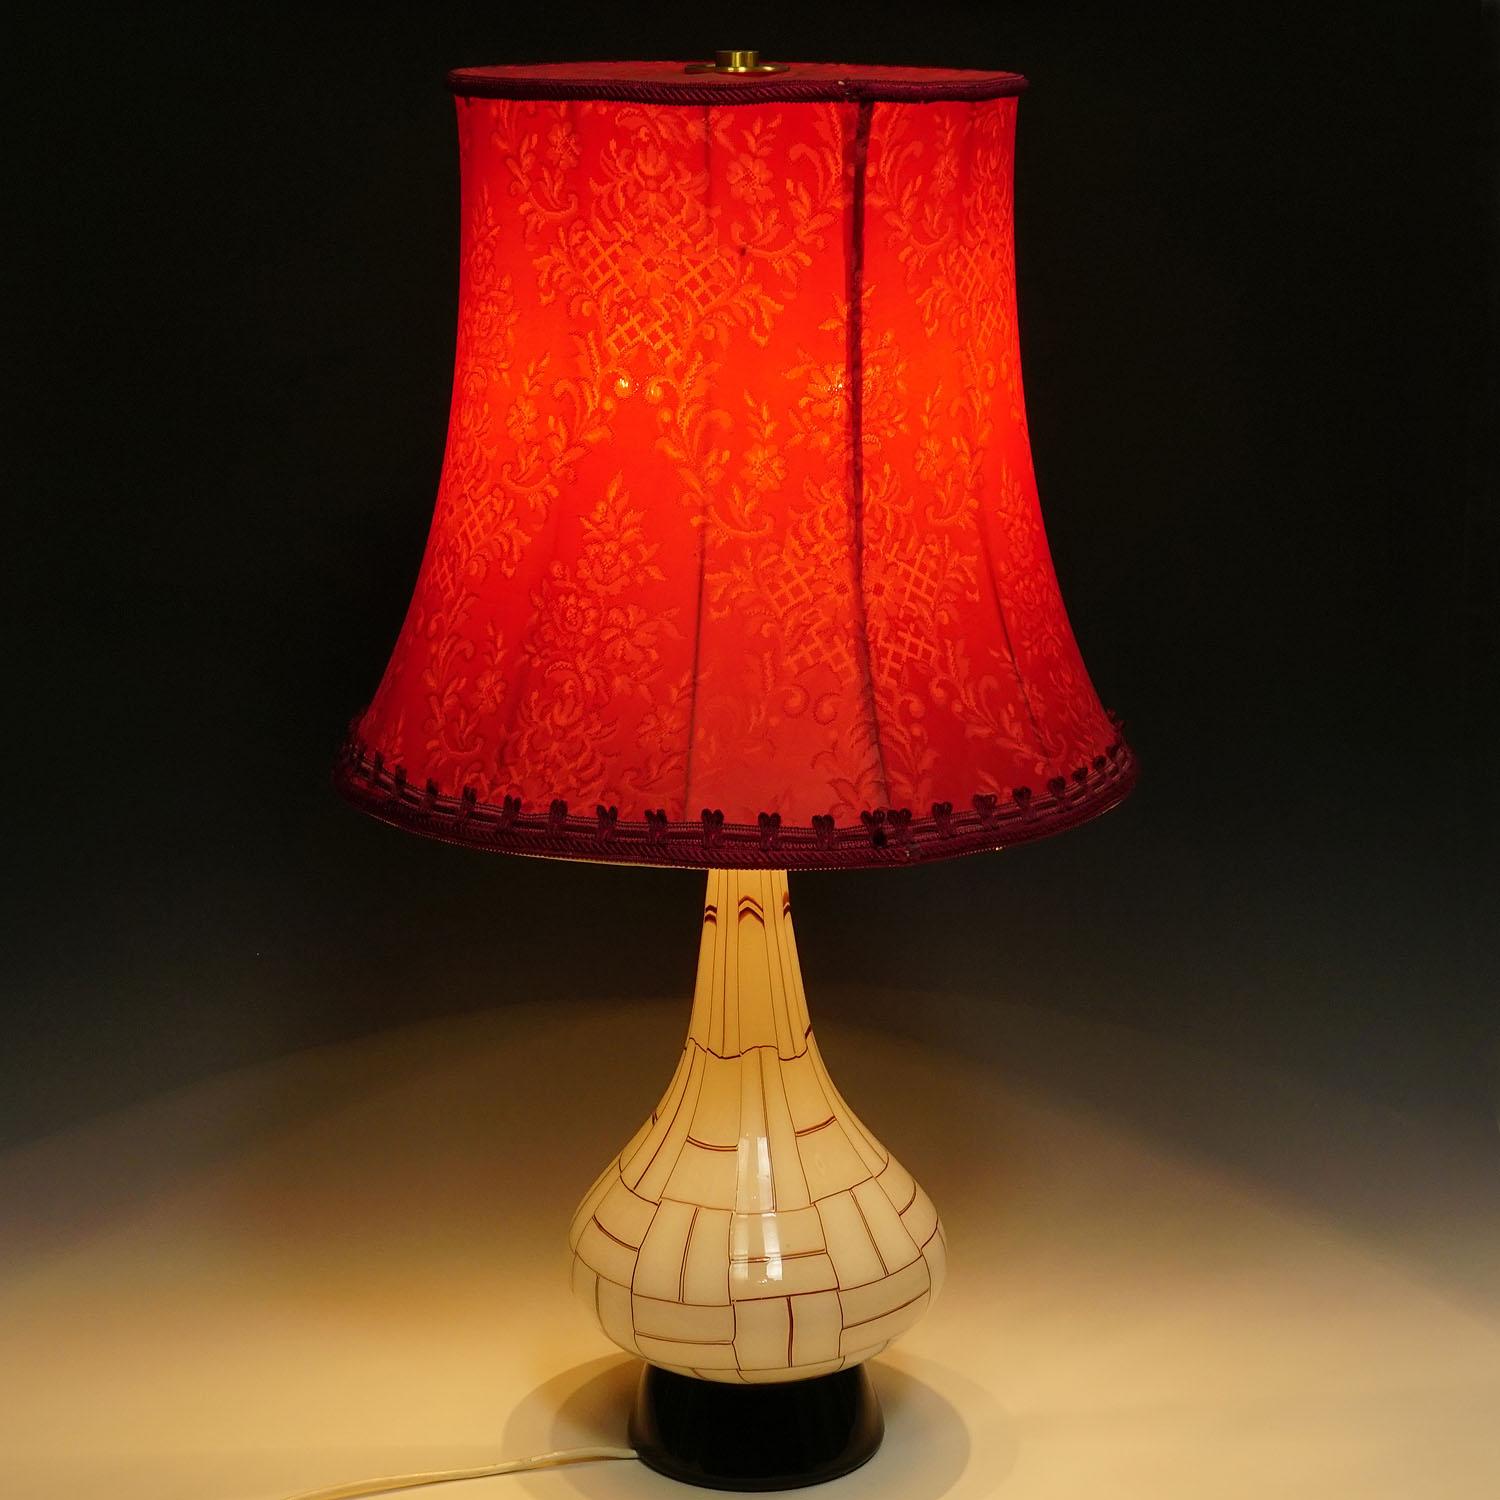 Vintage Barovier & Toso 'Sidone' Table Lamp, Murano circa 1960s For Sale 1